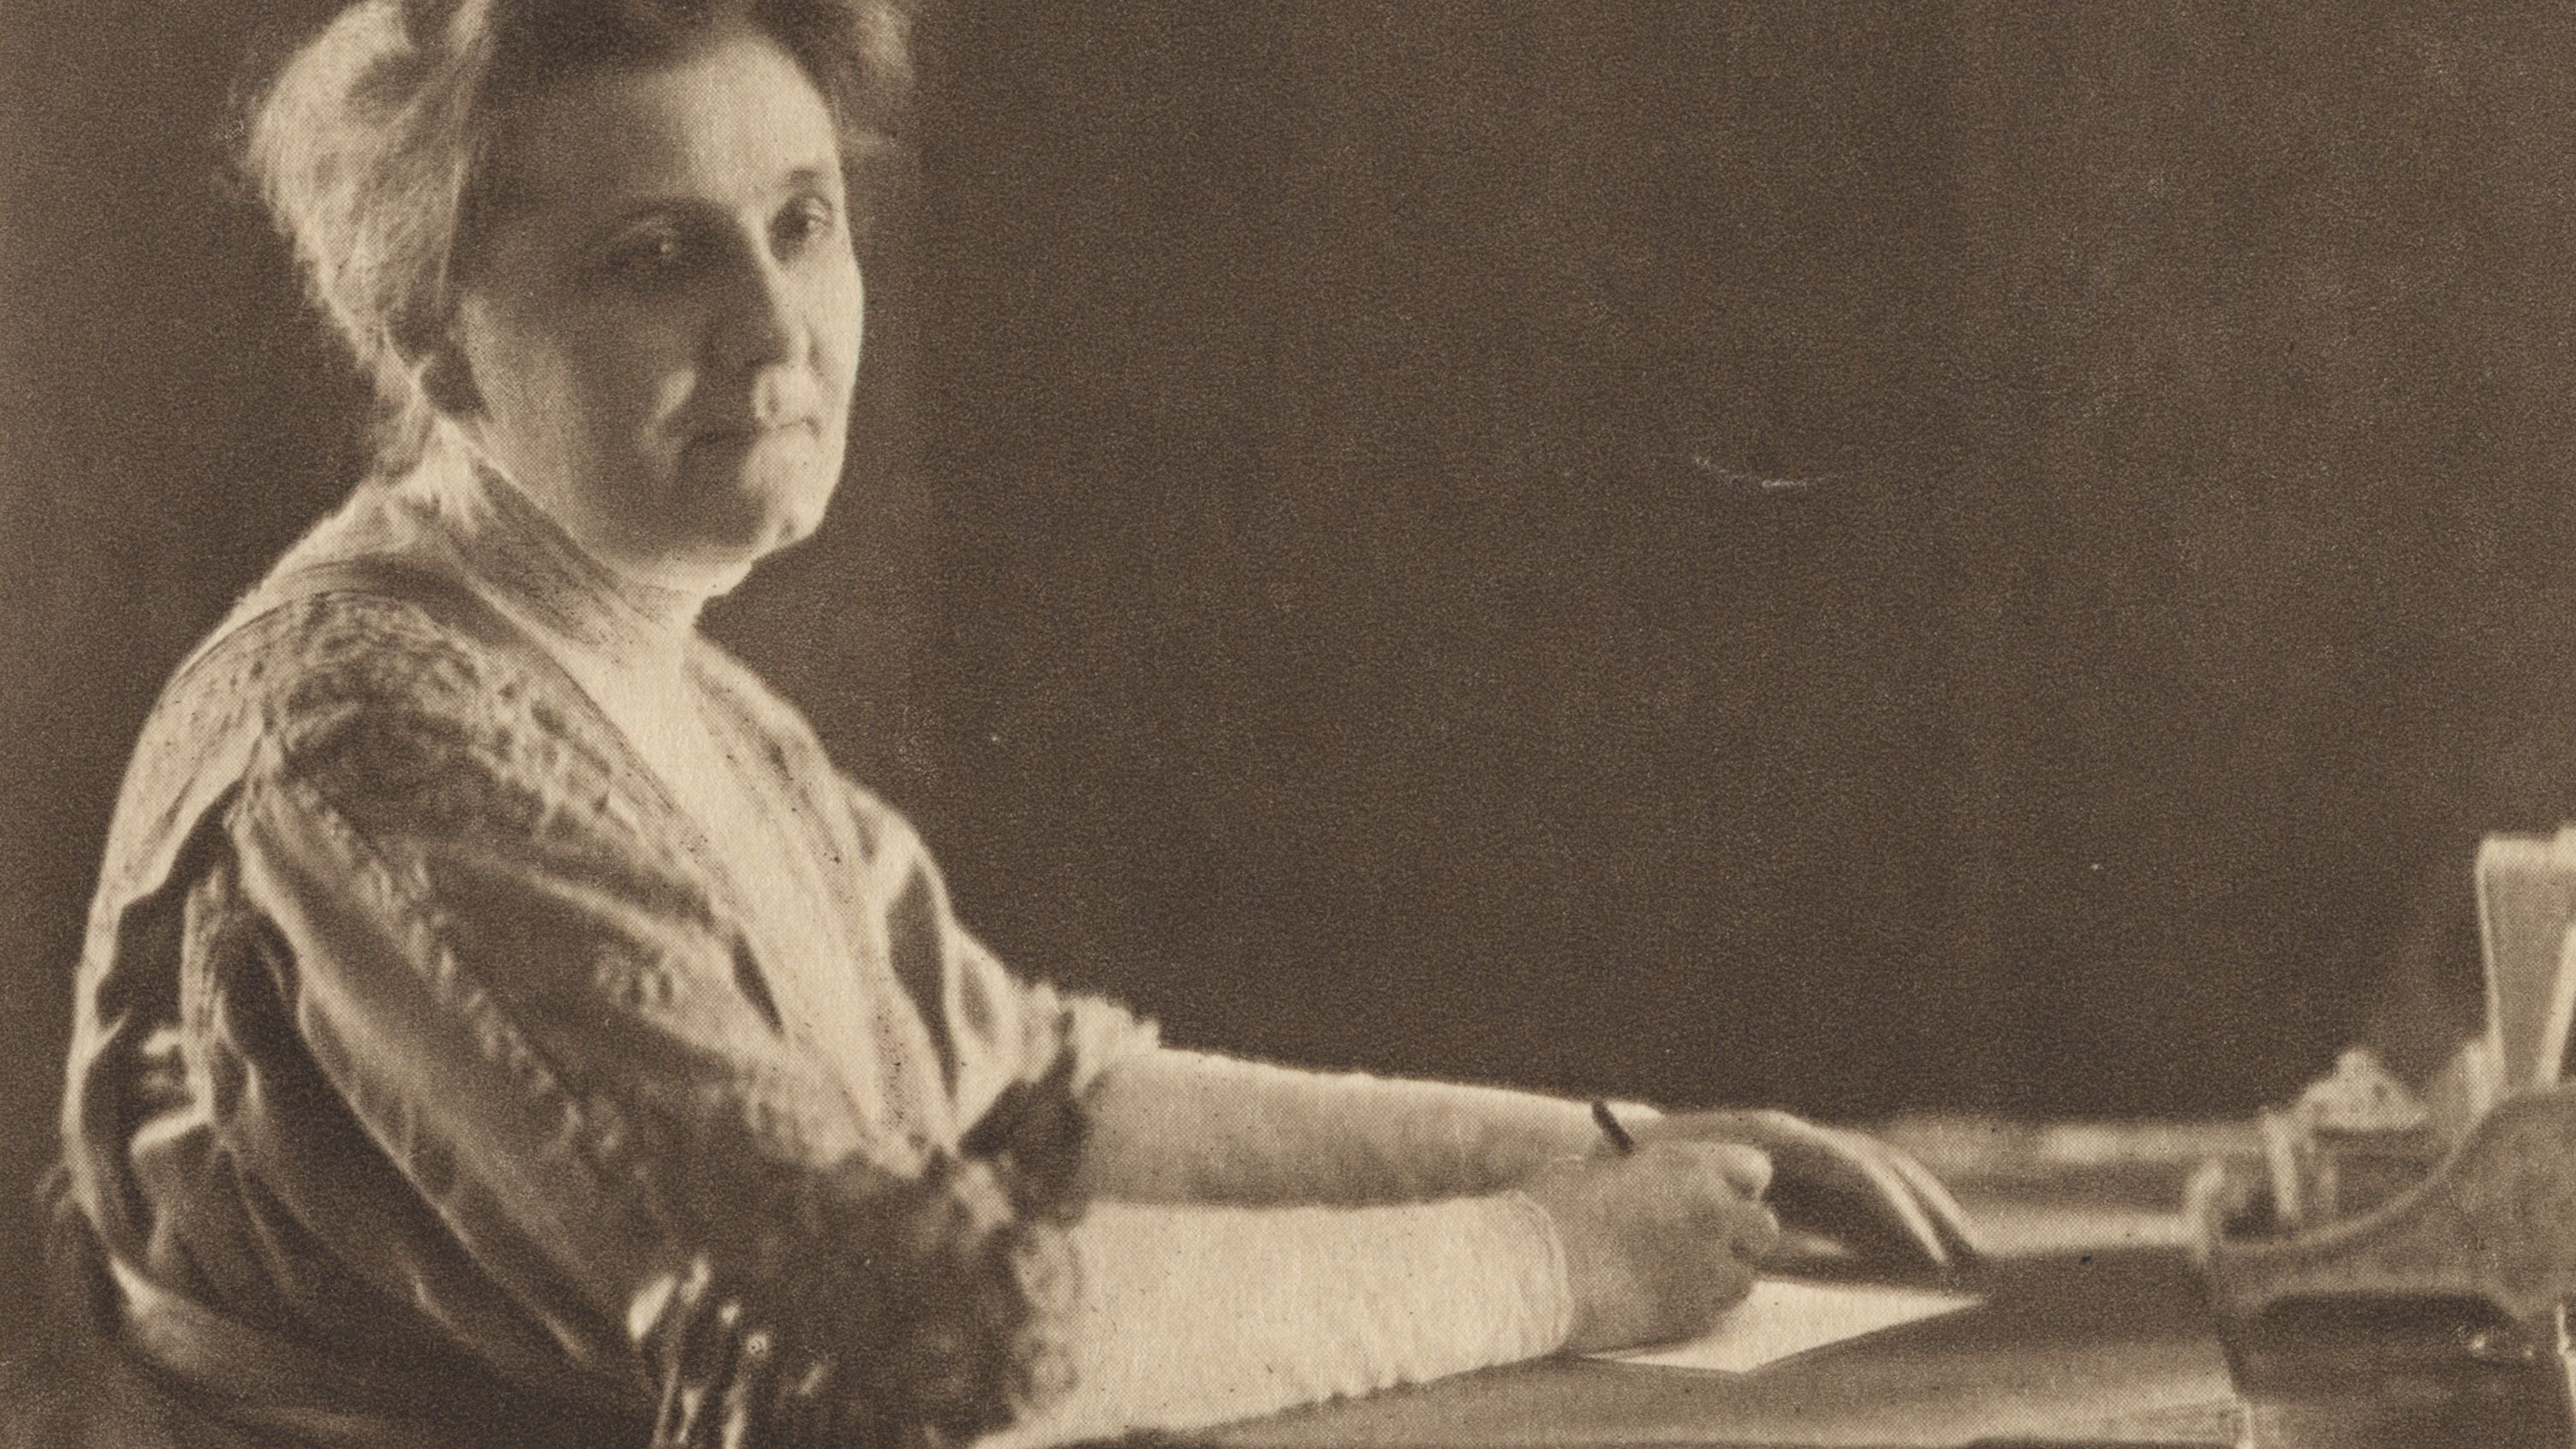 Why was Jane Addams so important?